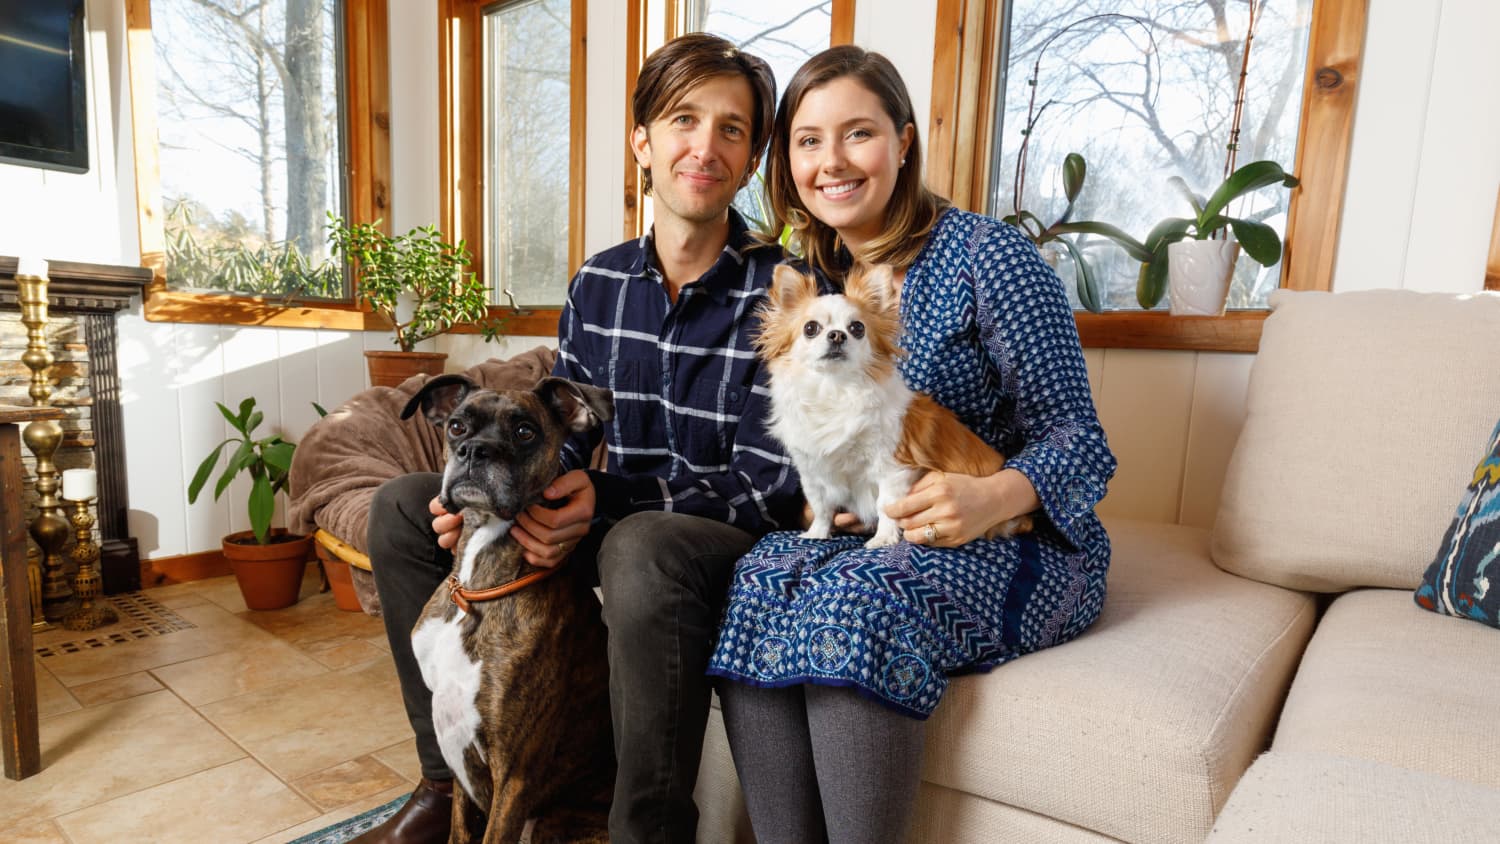 Marcus and Laura Gordon with their two dogs on the couch